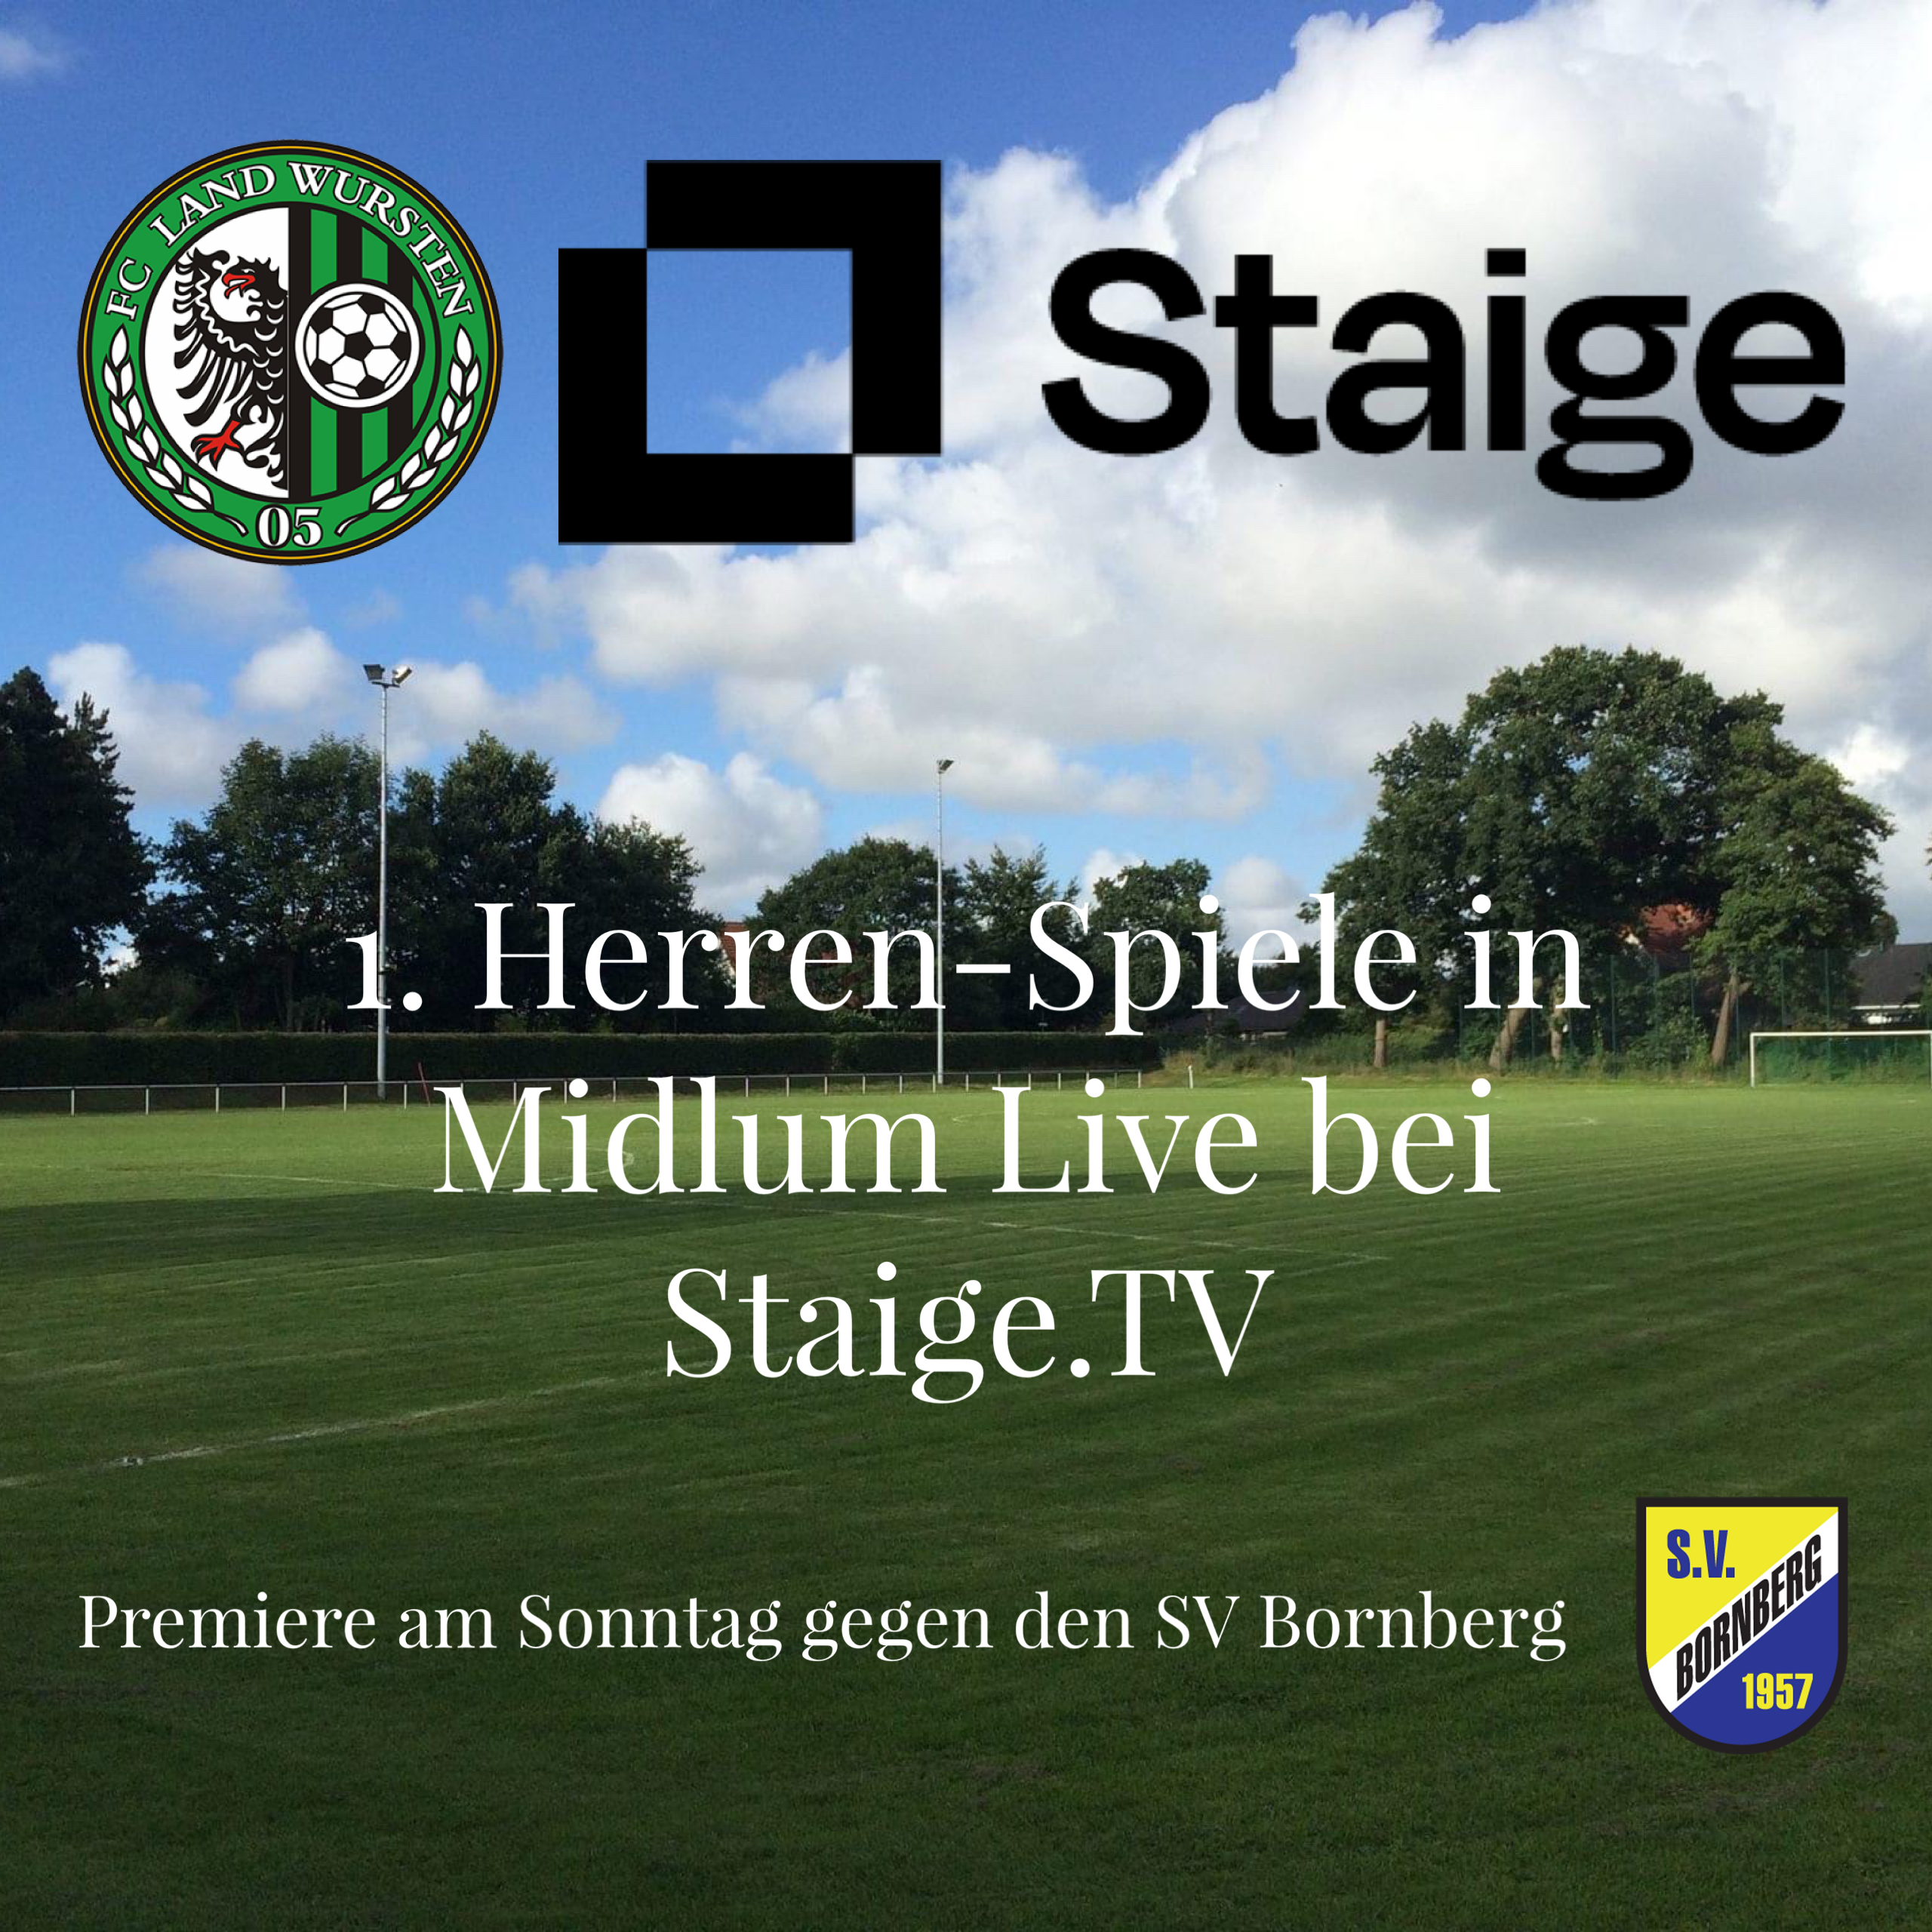 You are currently viewing 1. Herren-Spiele in Midlum Live bei Staige.TV